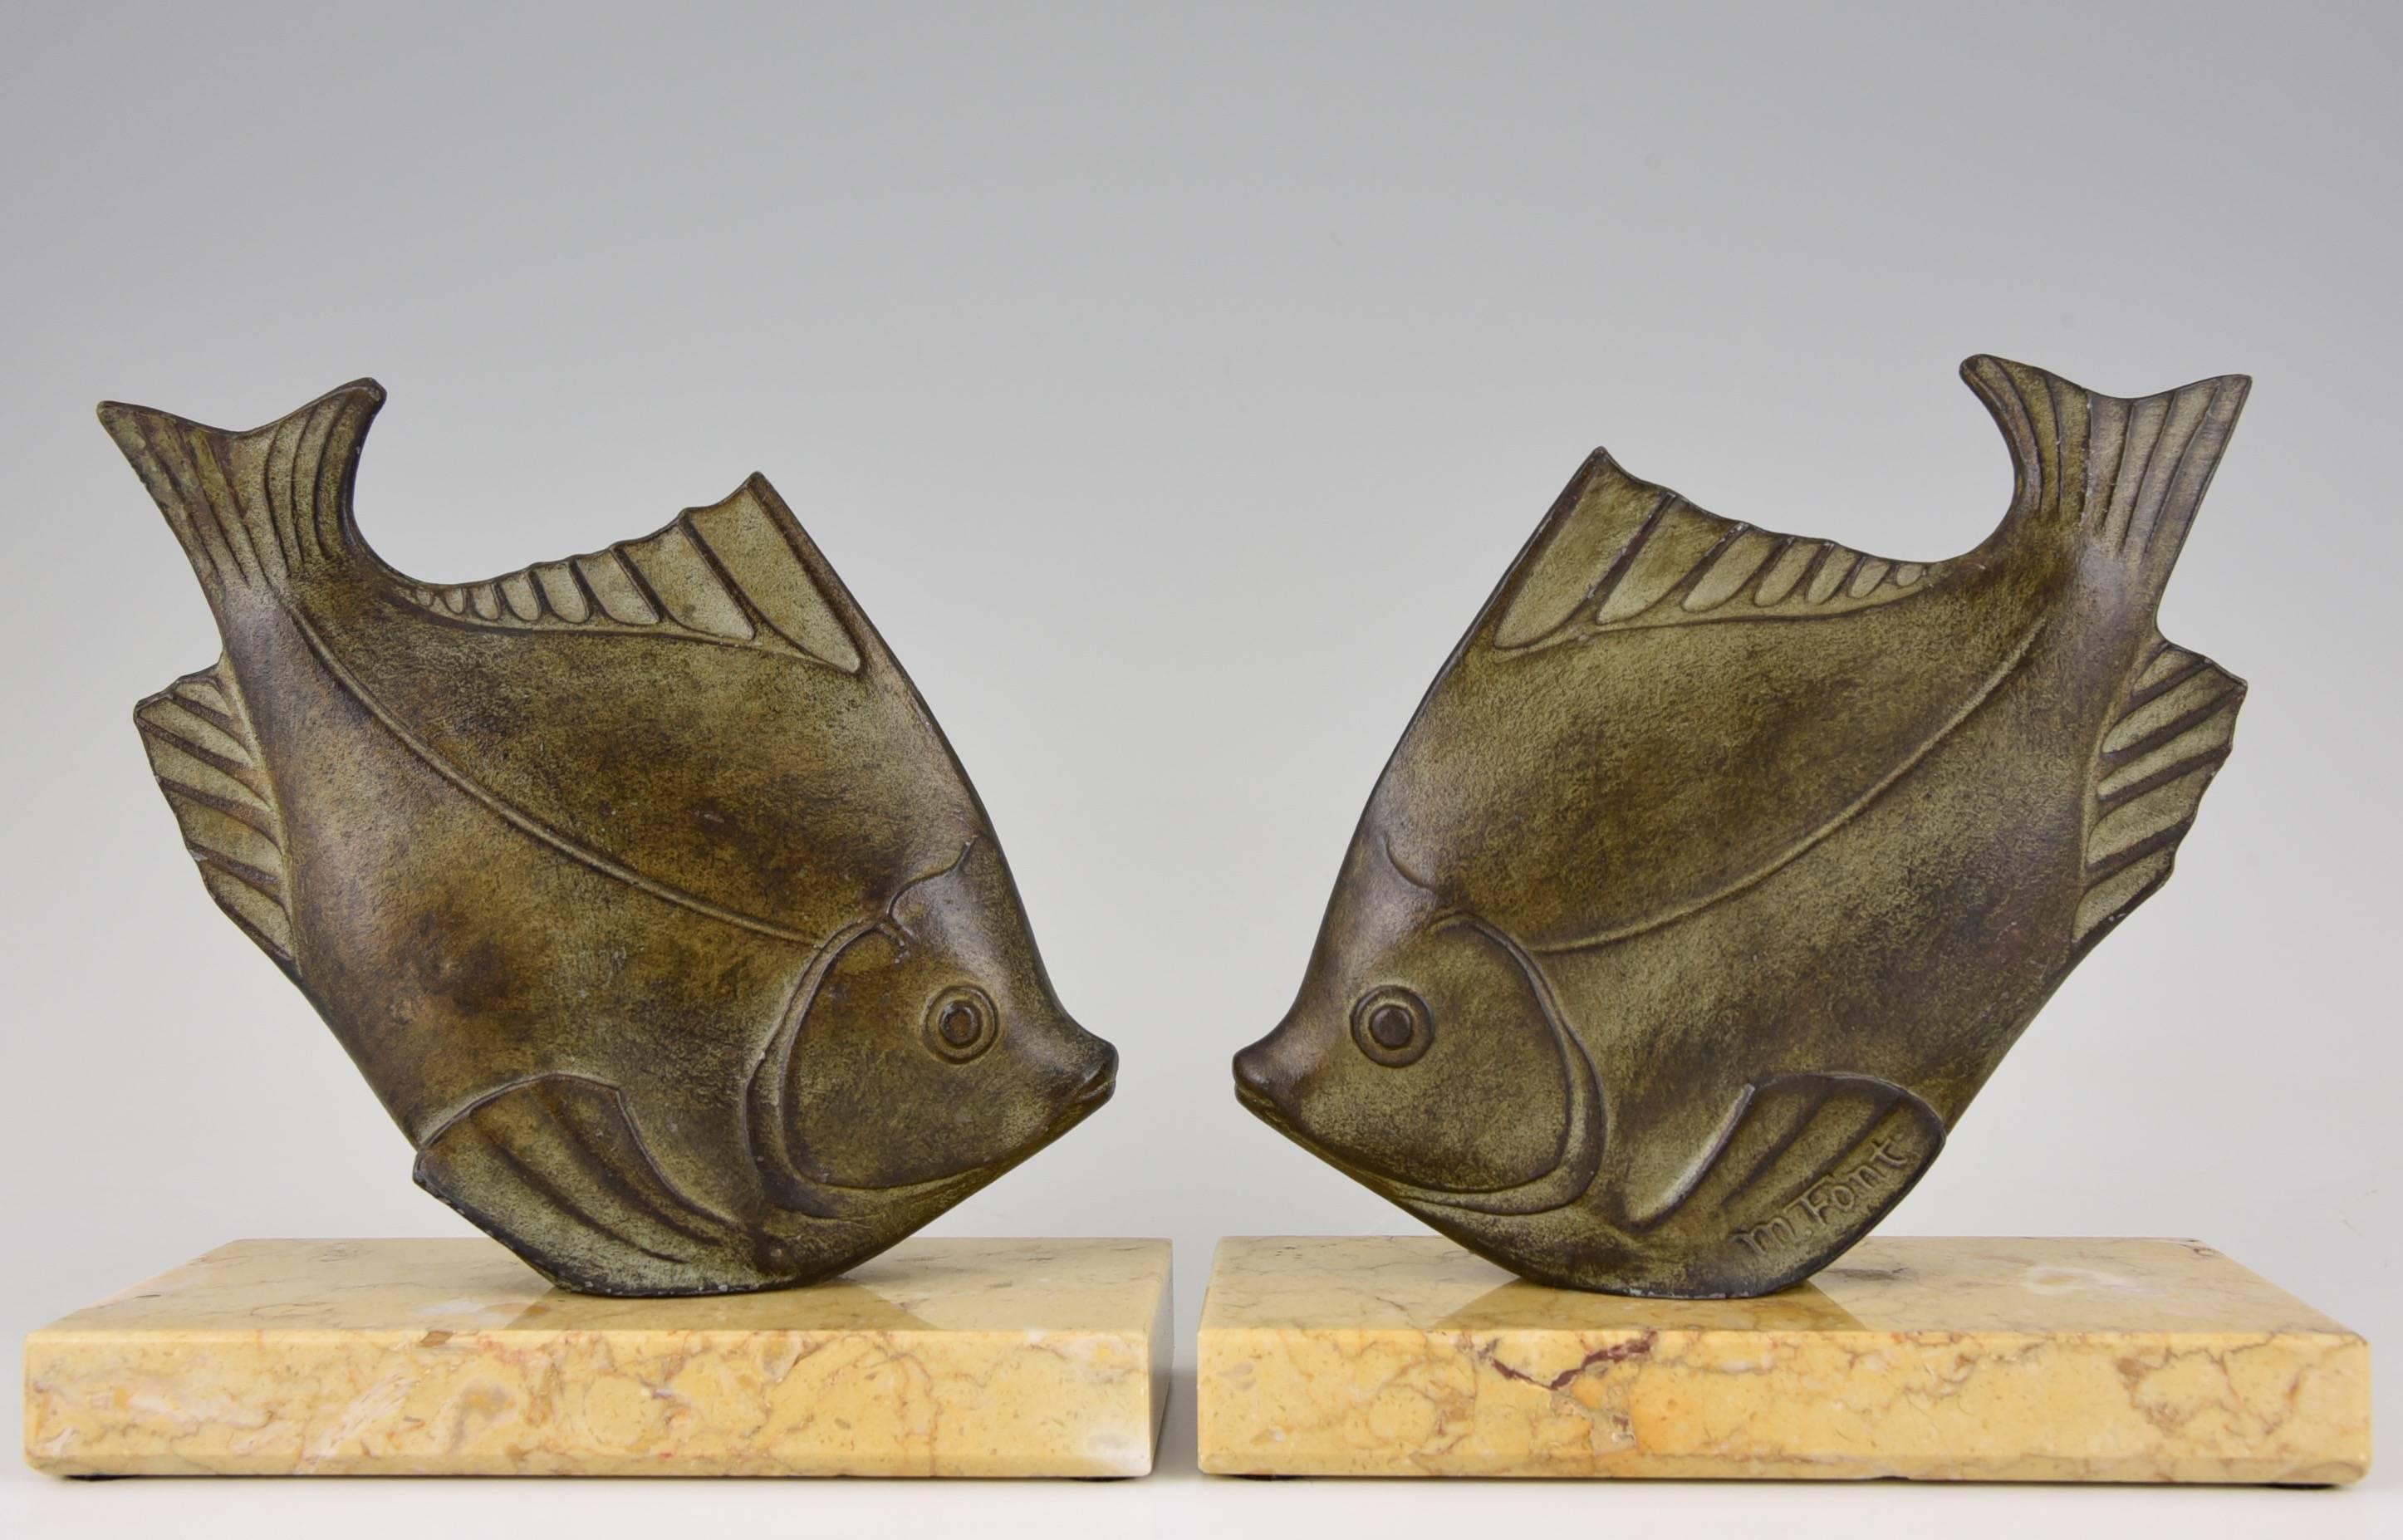 Description:  Art Deco fish bookends
Artist / Maker: M. Font. 
Signature / Marks: M. Font
Style:  Art Deco.		
Date:  1930.
Material:  Green patinated metal.  Marble bases.
Origin:  France.			
Size of one:		 
H. 6.1 inch x L. 5.9 inch x W.